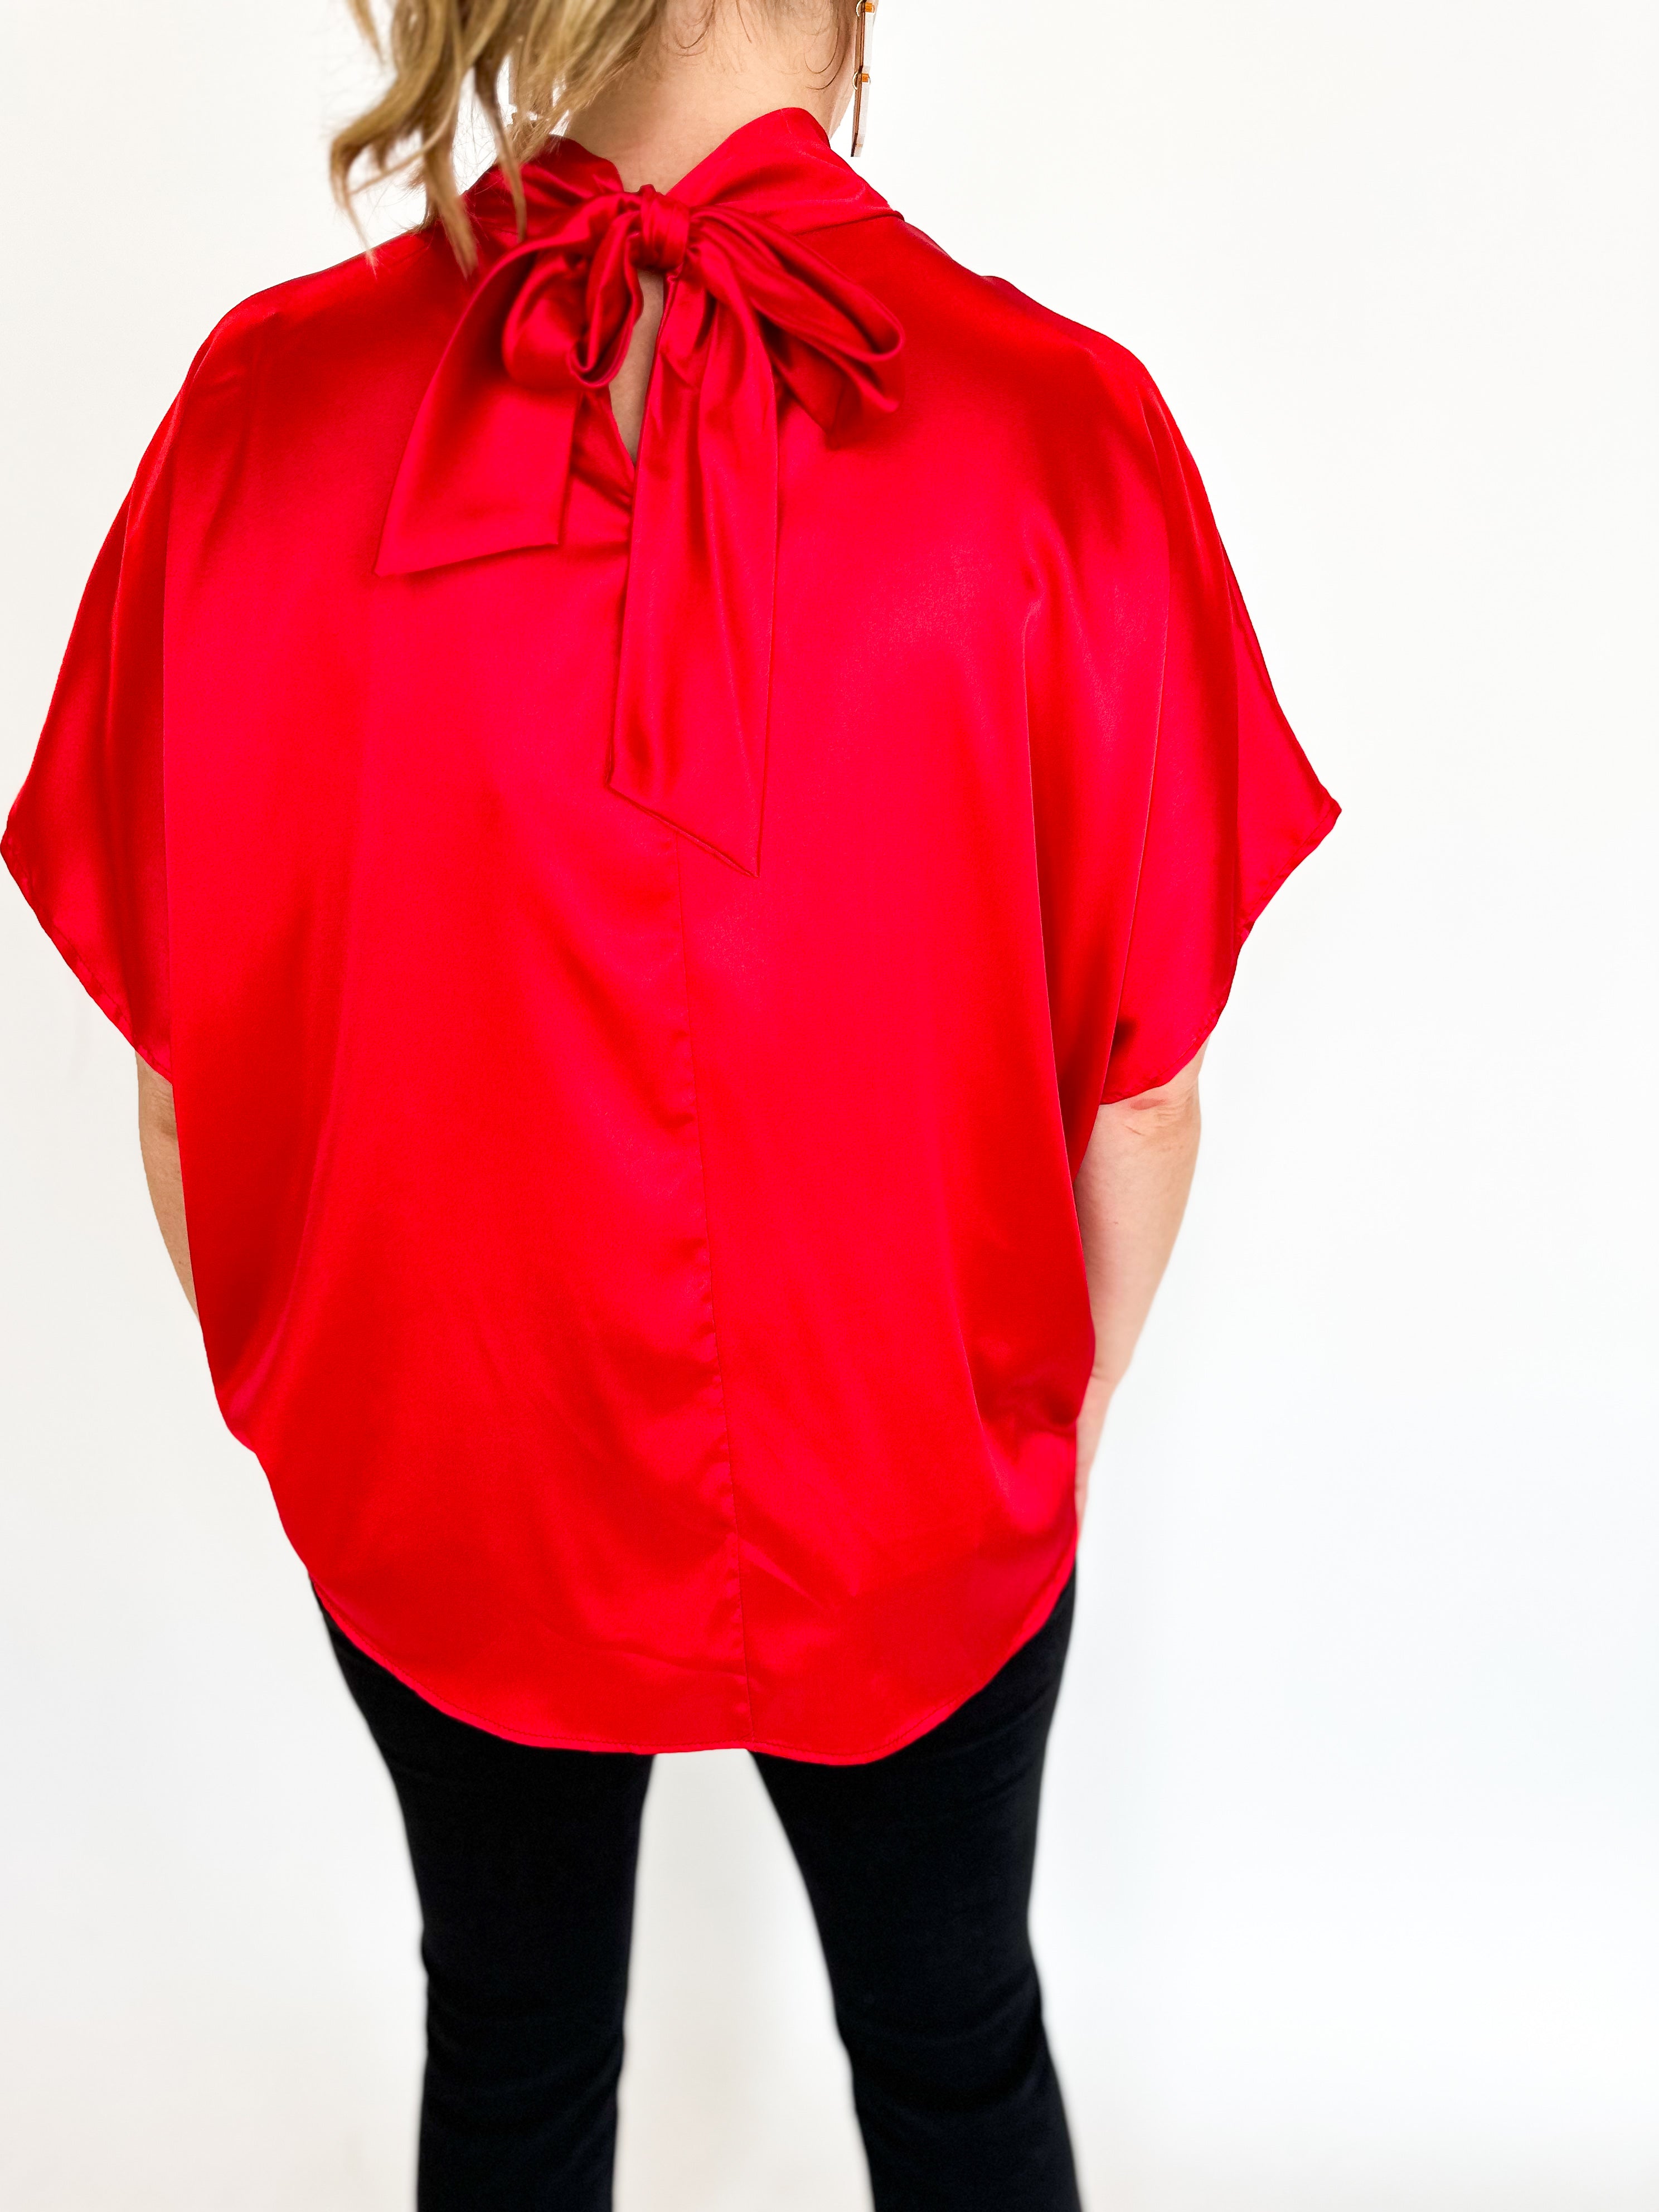 Charming Satin Blouse - Cherry Red-200 Fashion Blouses-ADRIENNE-July & June Women's Fashion Boutique Located in San Antonio, Texas